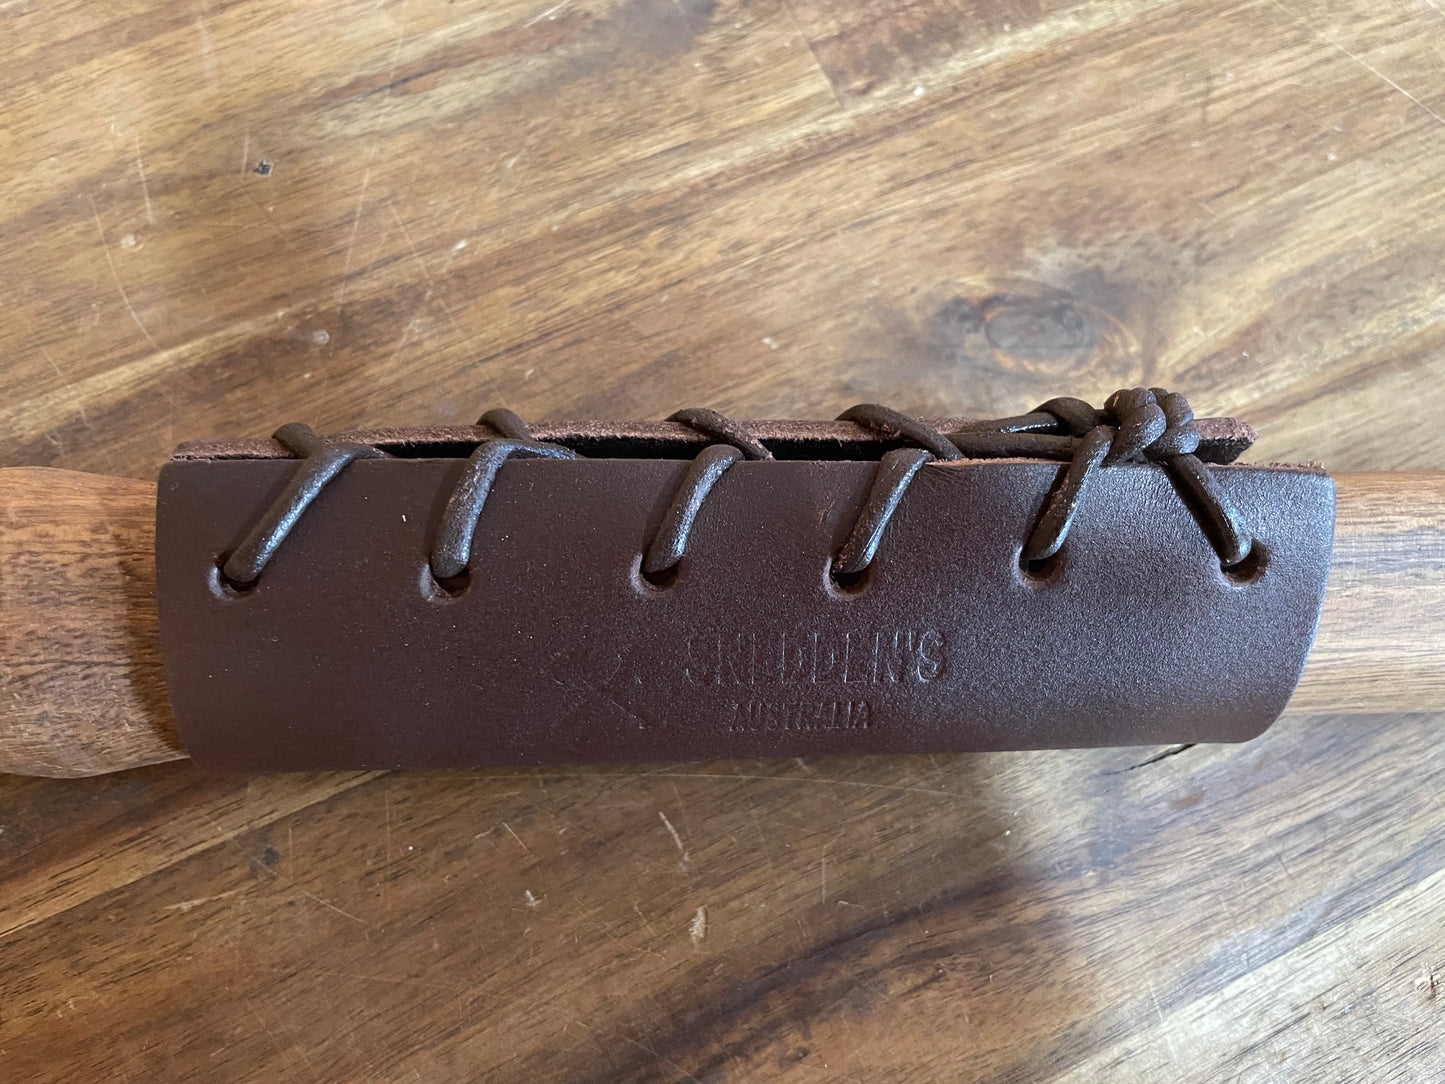 Blockbuster / Sledge Handle Protector. Thick 4mm leather Brown